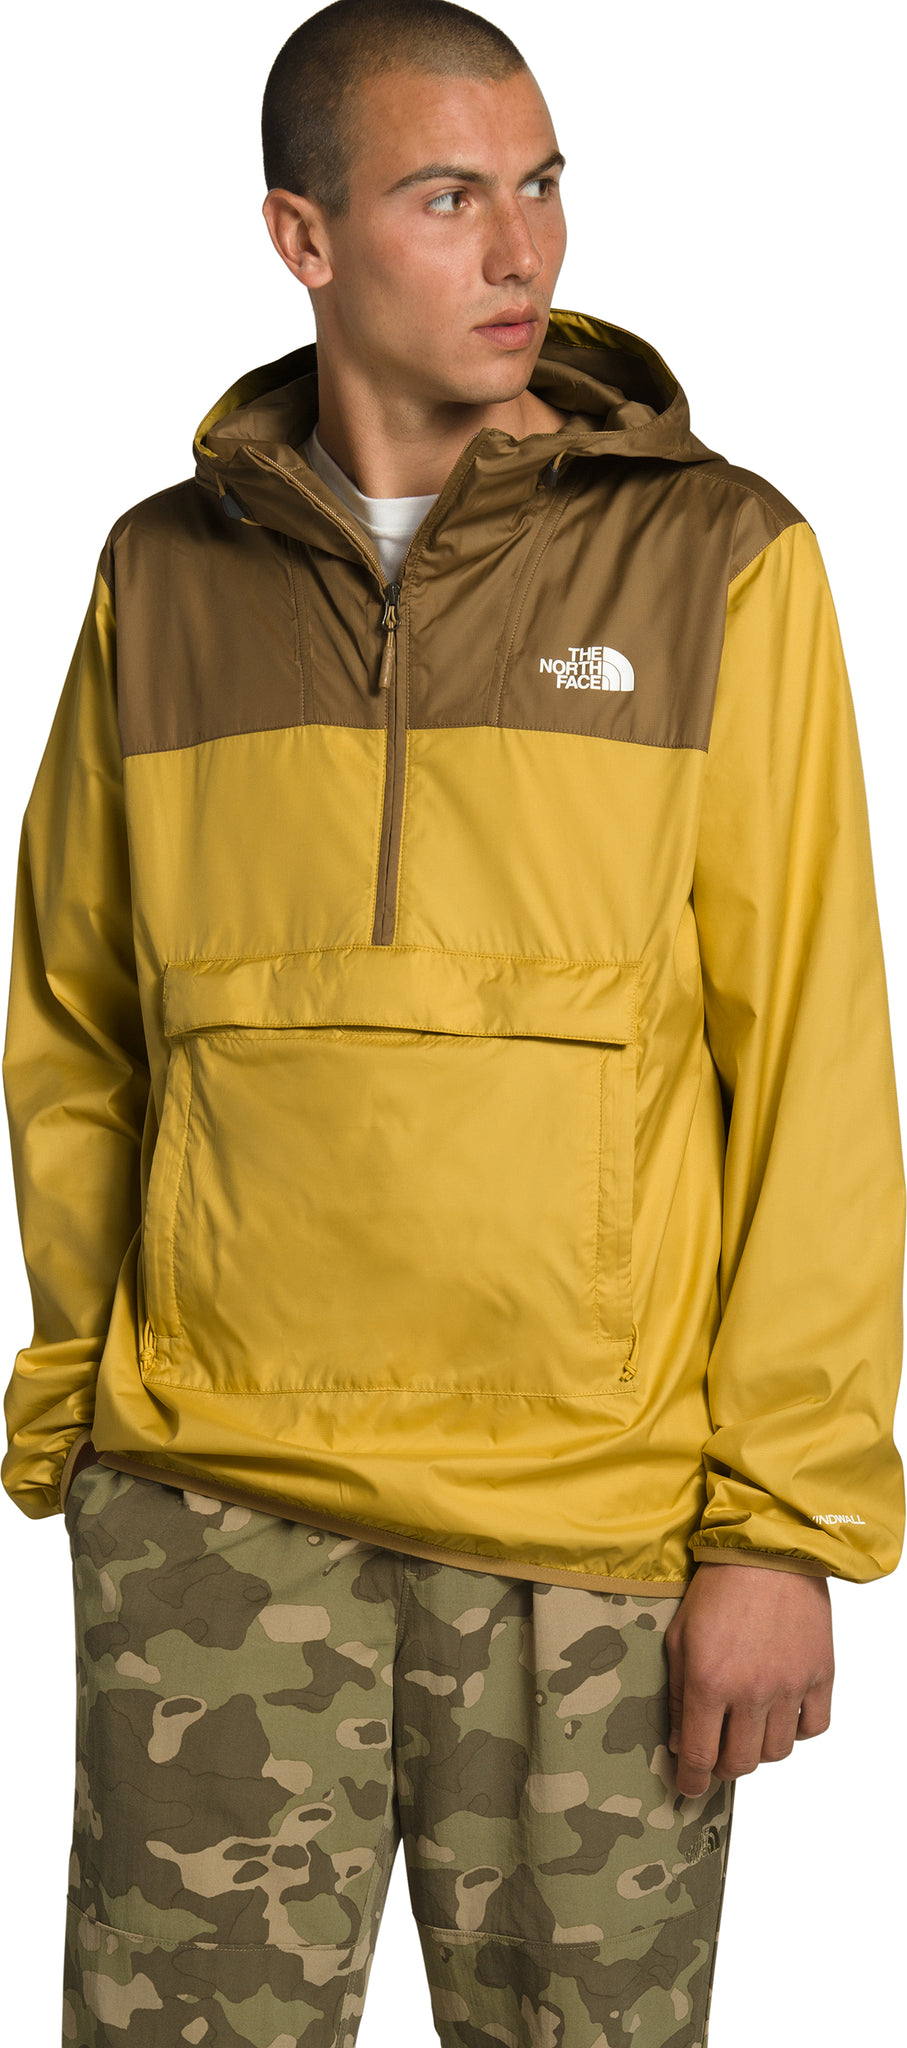 the north face fanorak review